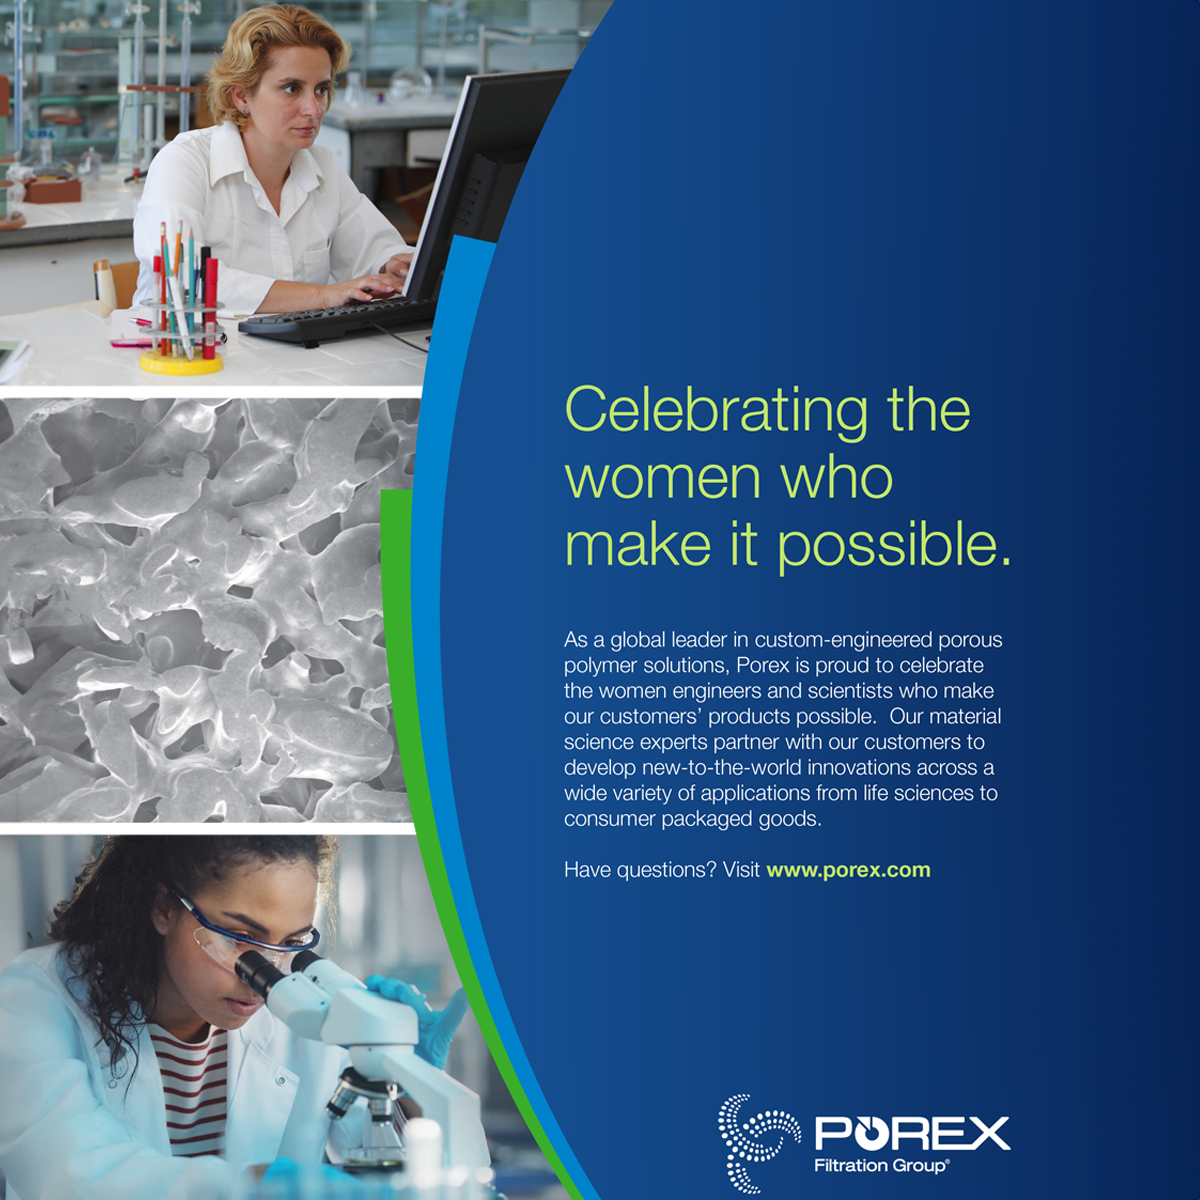 Celebrating #InternationalWomensDay at Porex! Today and every day, we honor the powerful women around us. Your unique abilities, leadership, and passion continue to motivate us.